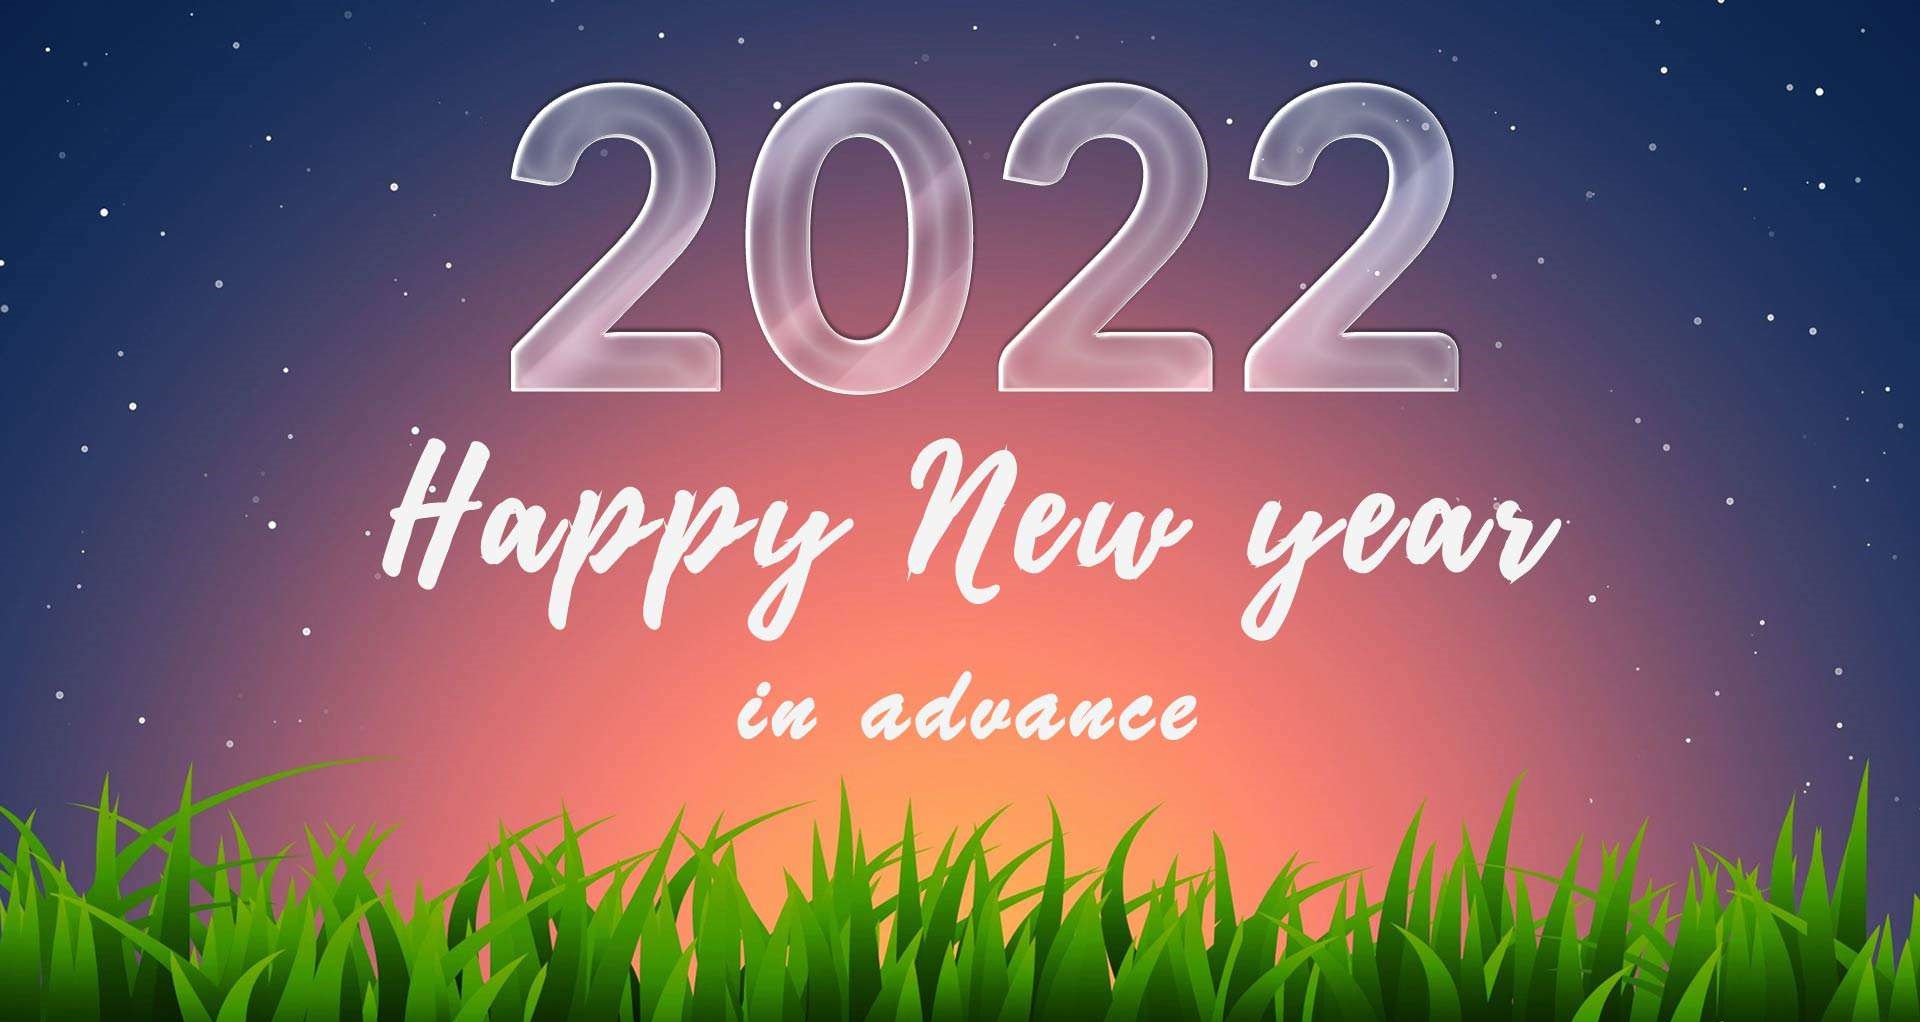 Happy New Year HD Wallpapers, Images (Free Download)